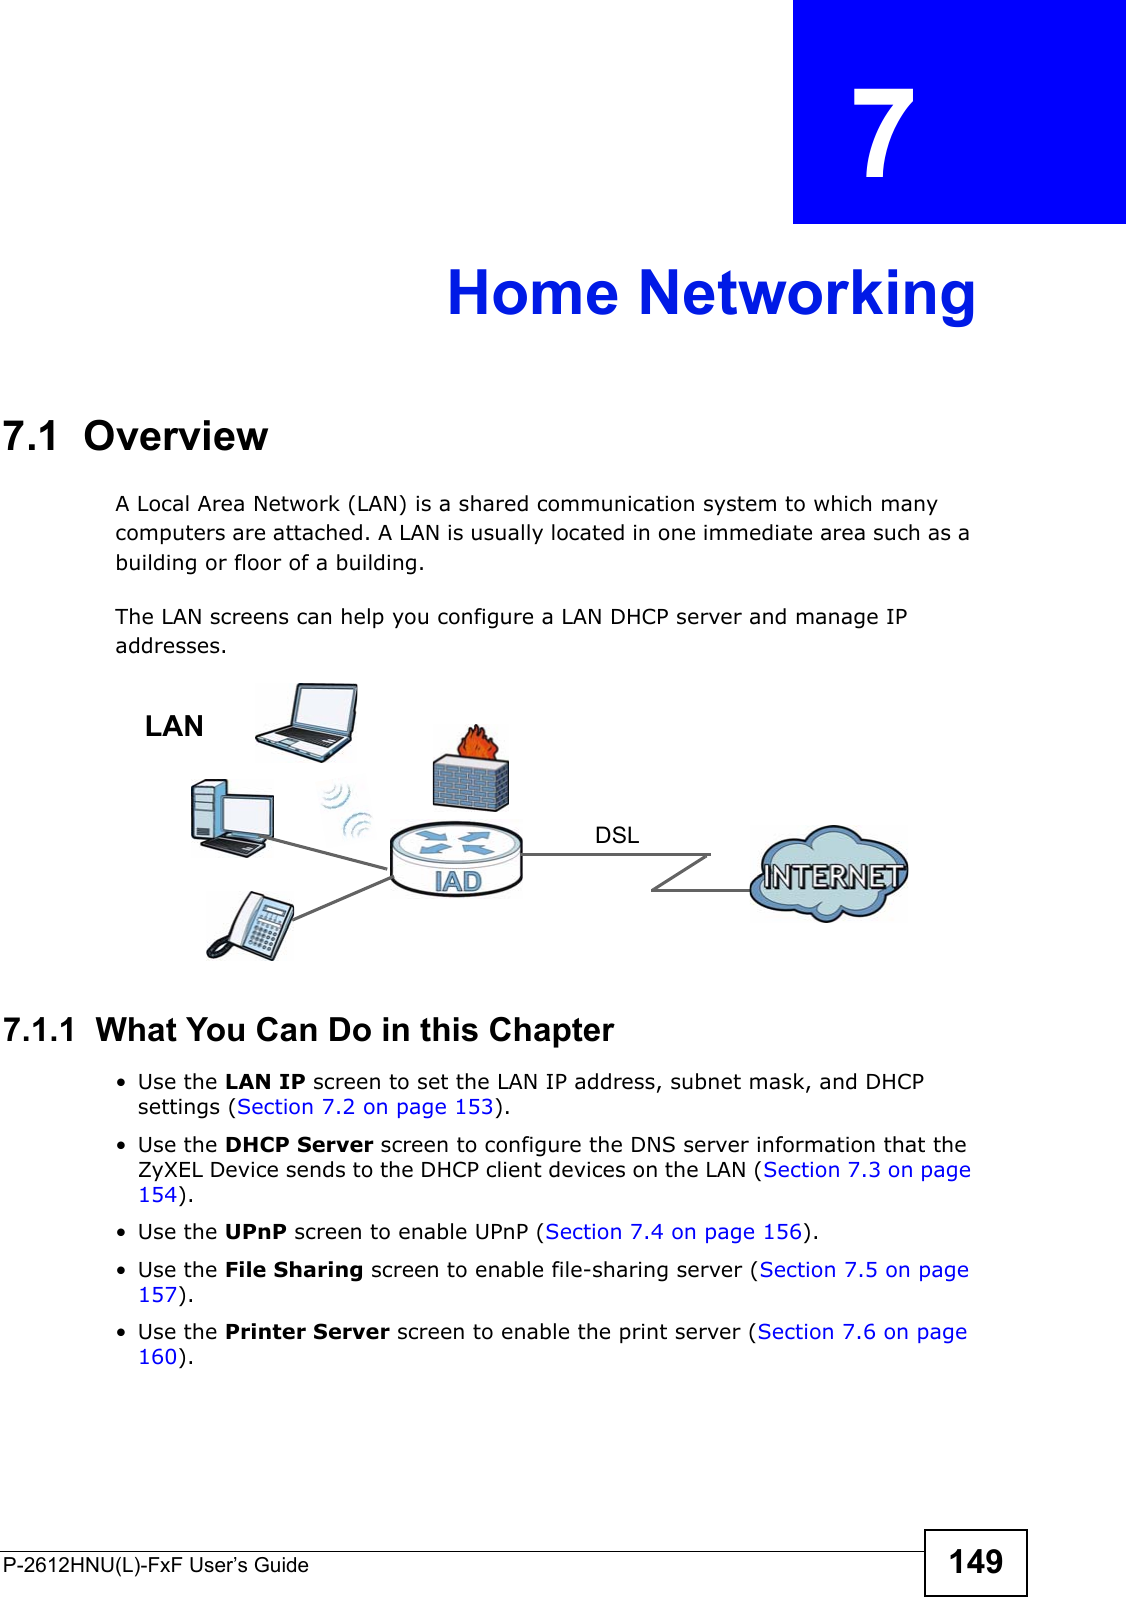 P-2612HNU(L)-FxF User’s Guide 149CHAPTER   7 Home Networking7.1  Overview  A Local Area Network (LAN) is a shared communication system to which manycomputers are attached. A LAN is usually located in one immediate area such as a building or floor of a building.The LAN screens can help you configure a LAN DHCP server and manage IPaddresses.7.1.1  What You Can Do in this Chapter• Use the LAN IP screen to set the LAN IP address, subnet mask, and DHCP settings (Section 7.2 on page 153). • Use the DHCP Server screen to configure the DNS server information that the ZyXEL Device sends to the DHCP client devices on the LAN (Section 7.3 on page 154).• Use the UPnP screen to enable UPnP (Section 7.4 on page 156).• Use the File Sharing screen to enable file-sharing server (Section 7.5 on page 157).• Use the Printer Server screen to enable the print server (Section 7.6 on page 160).DSLLAN